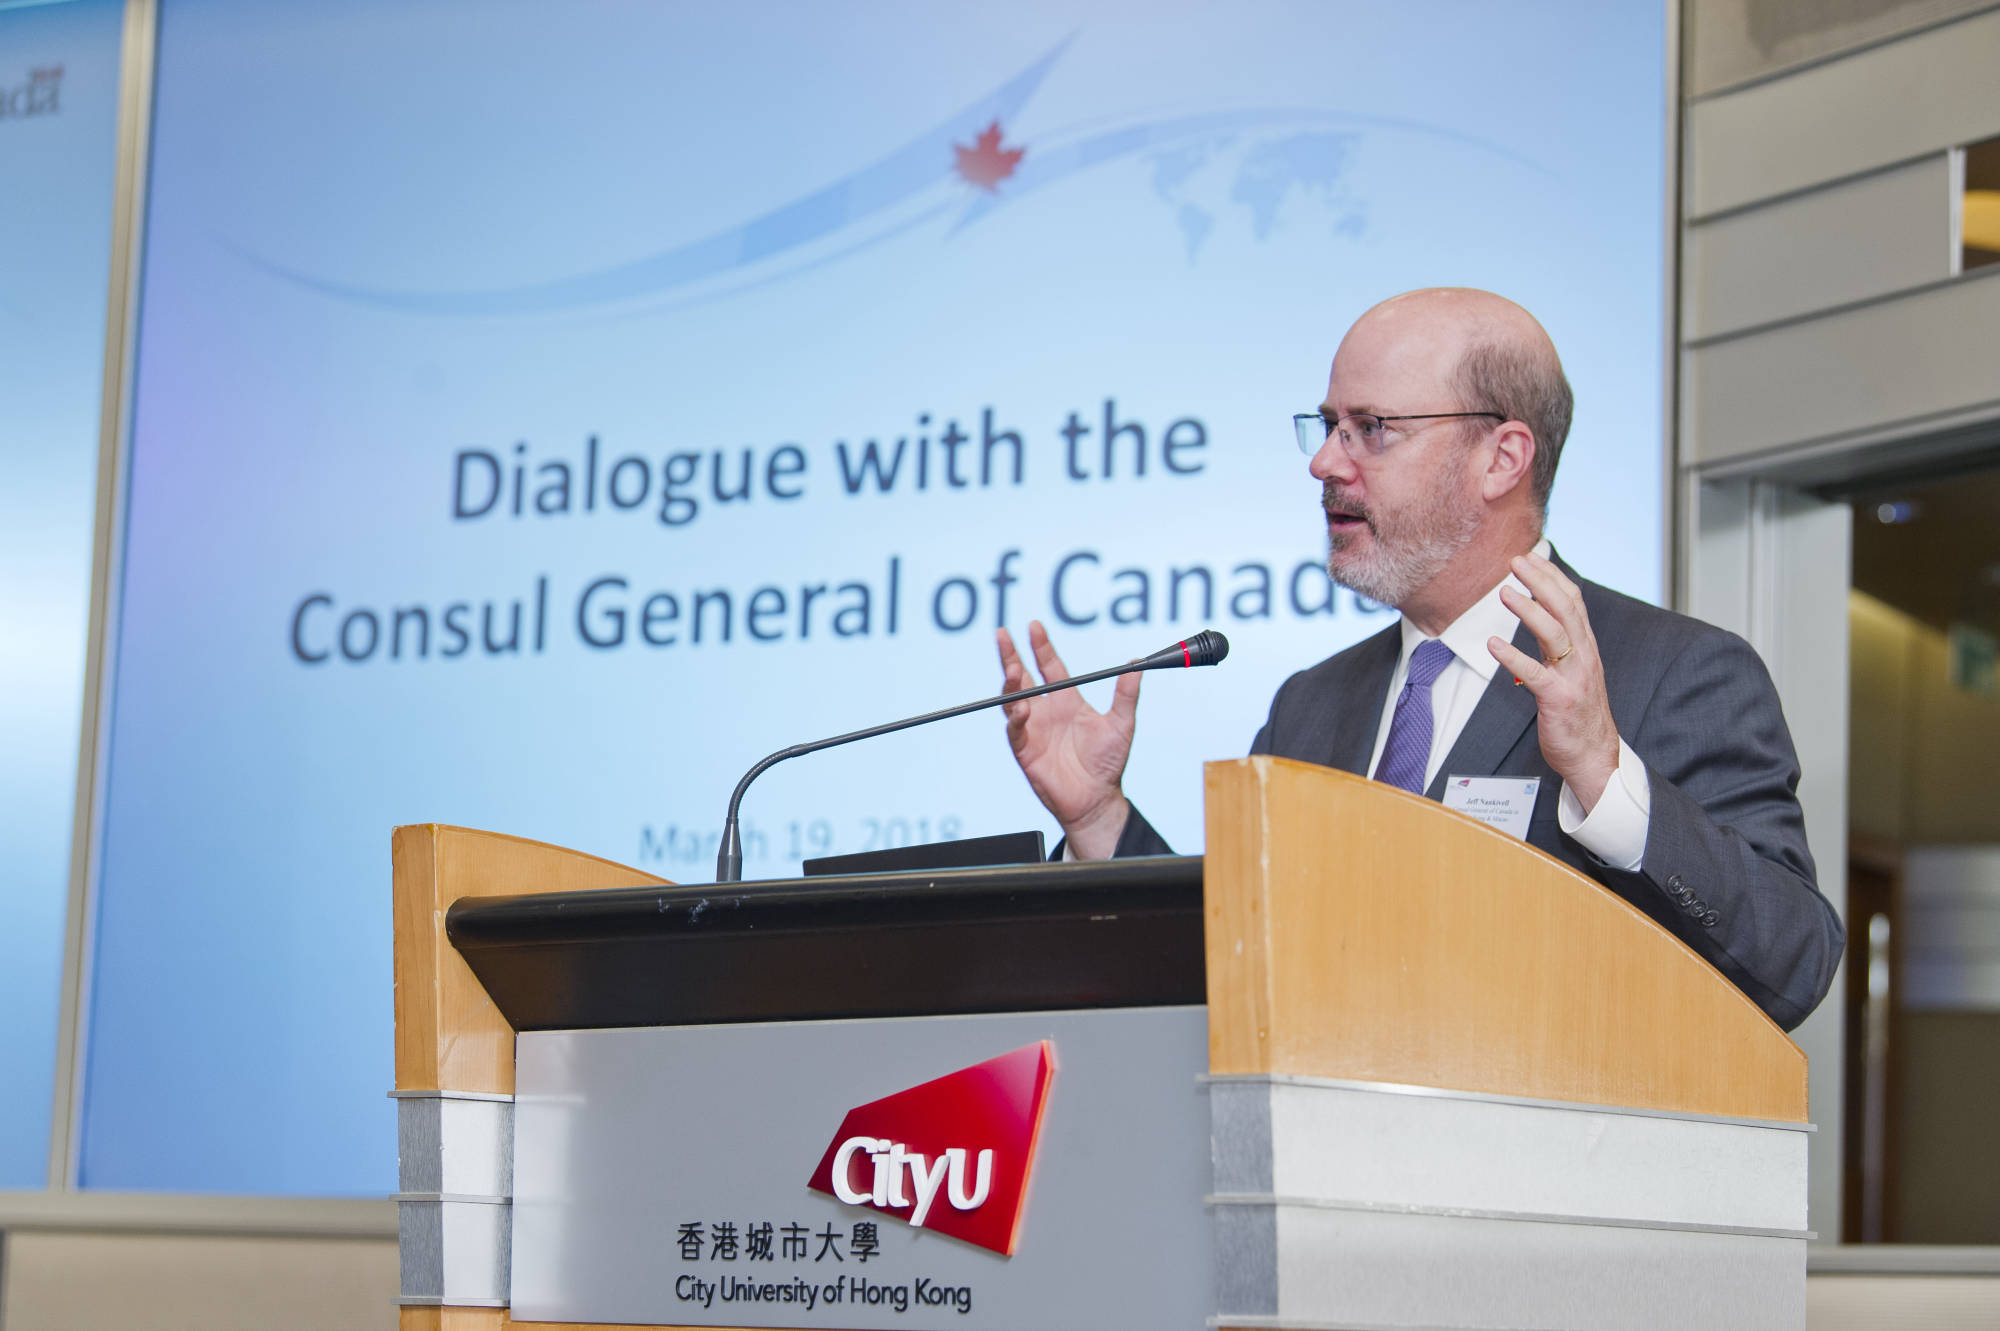 Consul General of Canada in Hong Kong and Macao